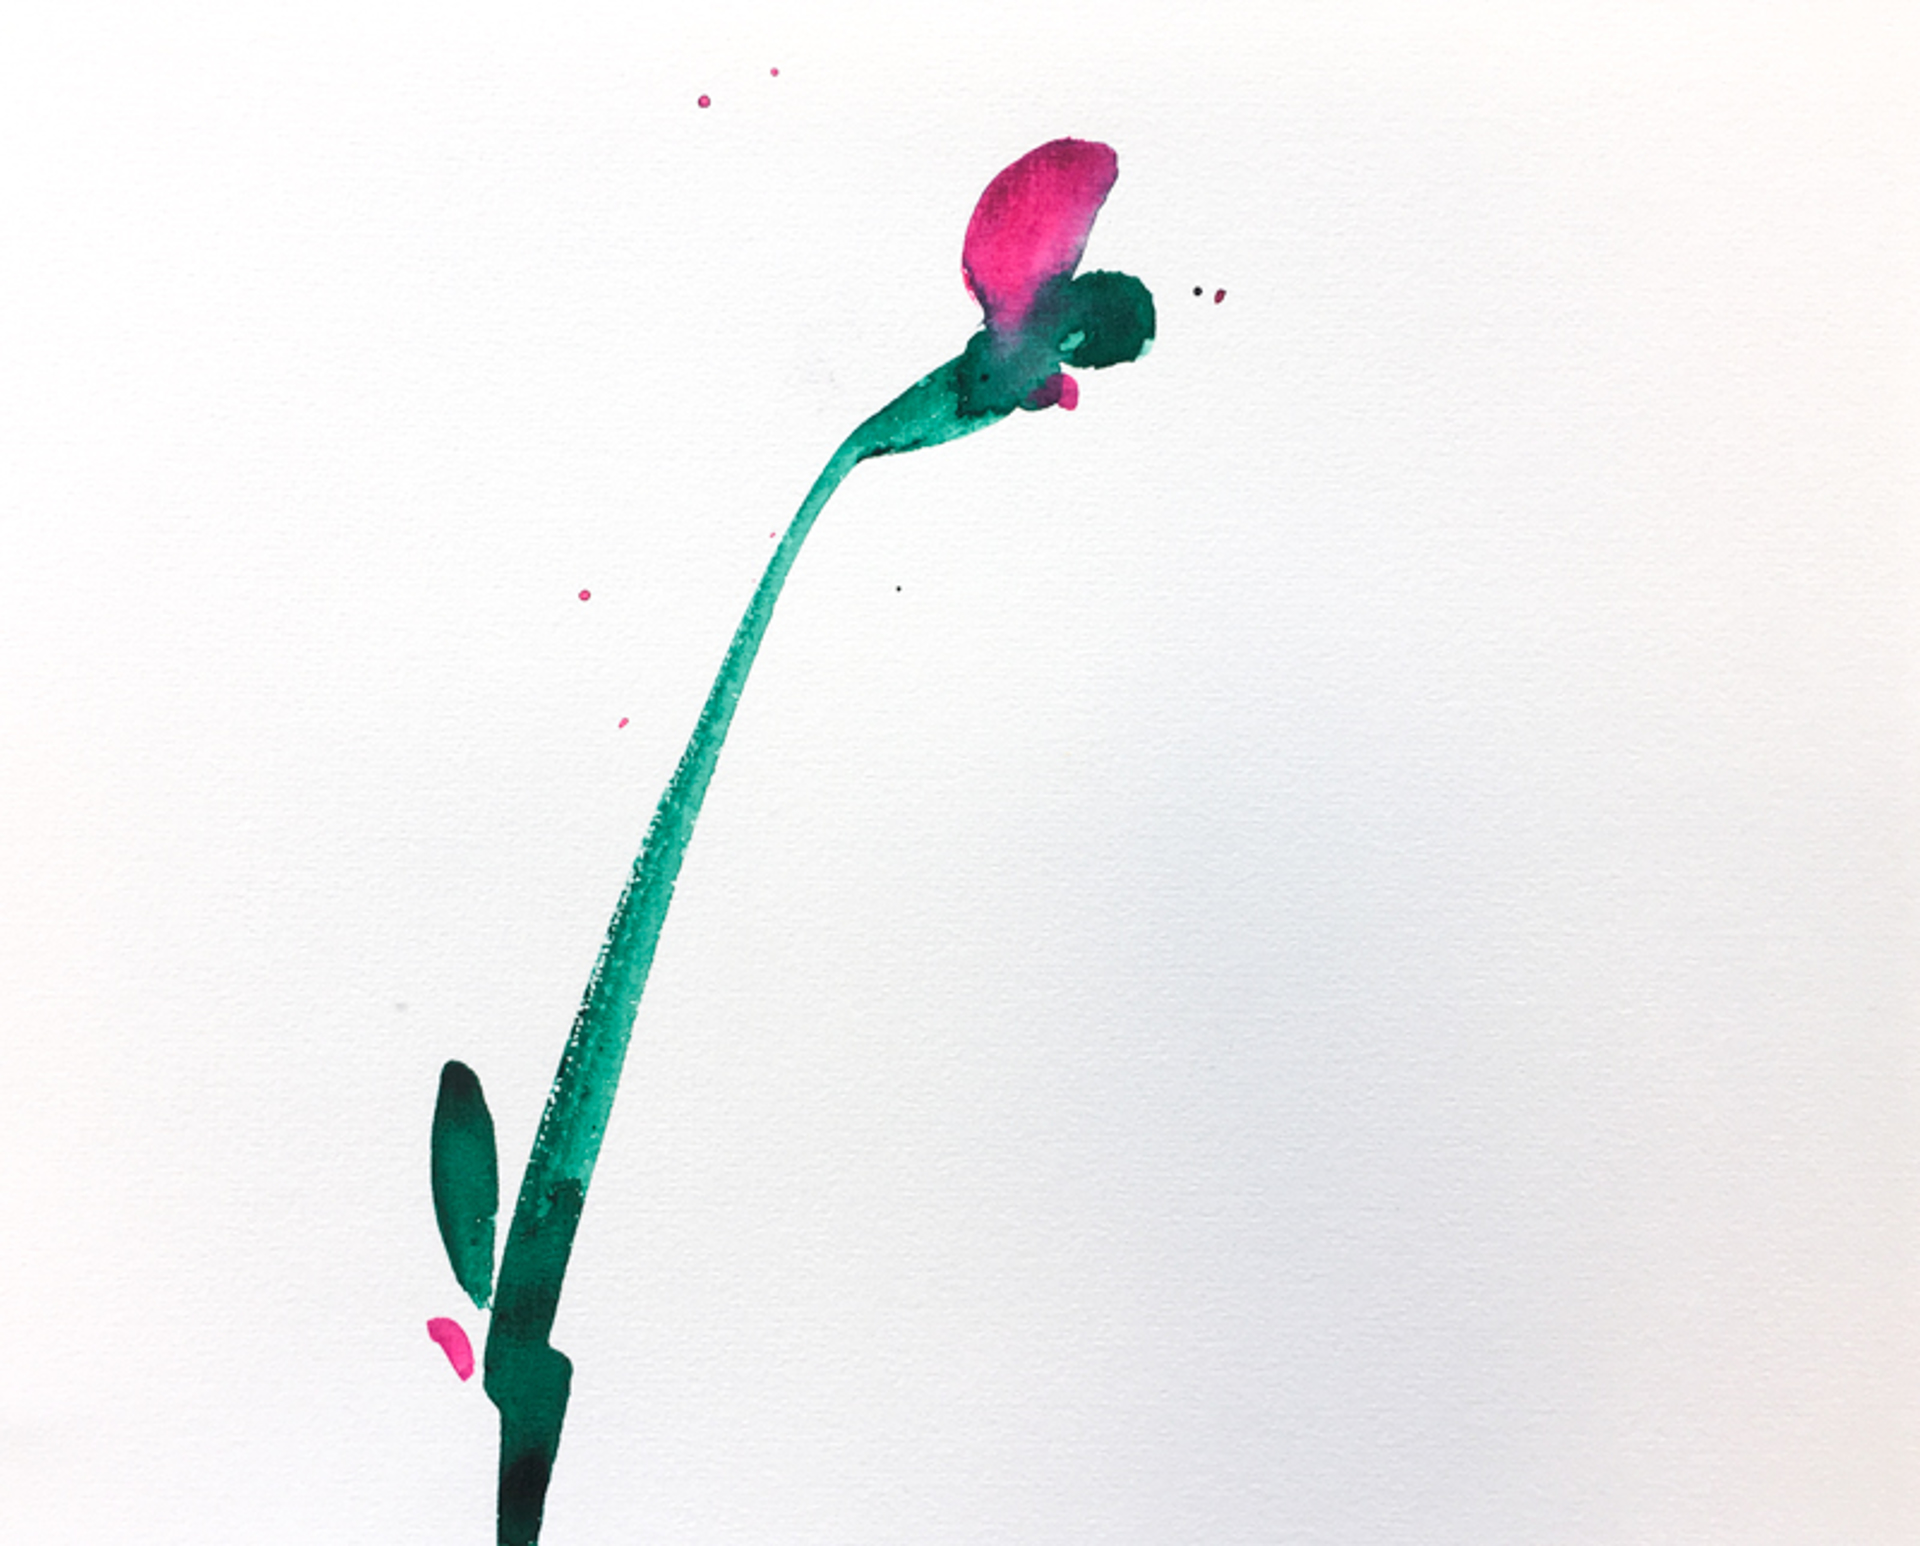 Floral Watercolor No. 2 by Christian Rothmann